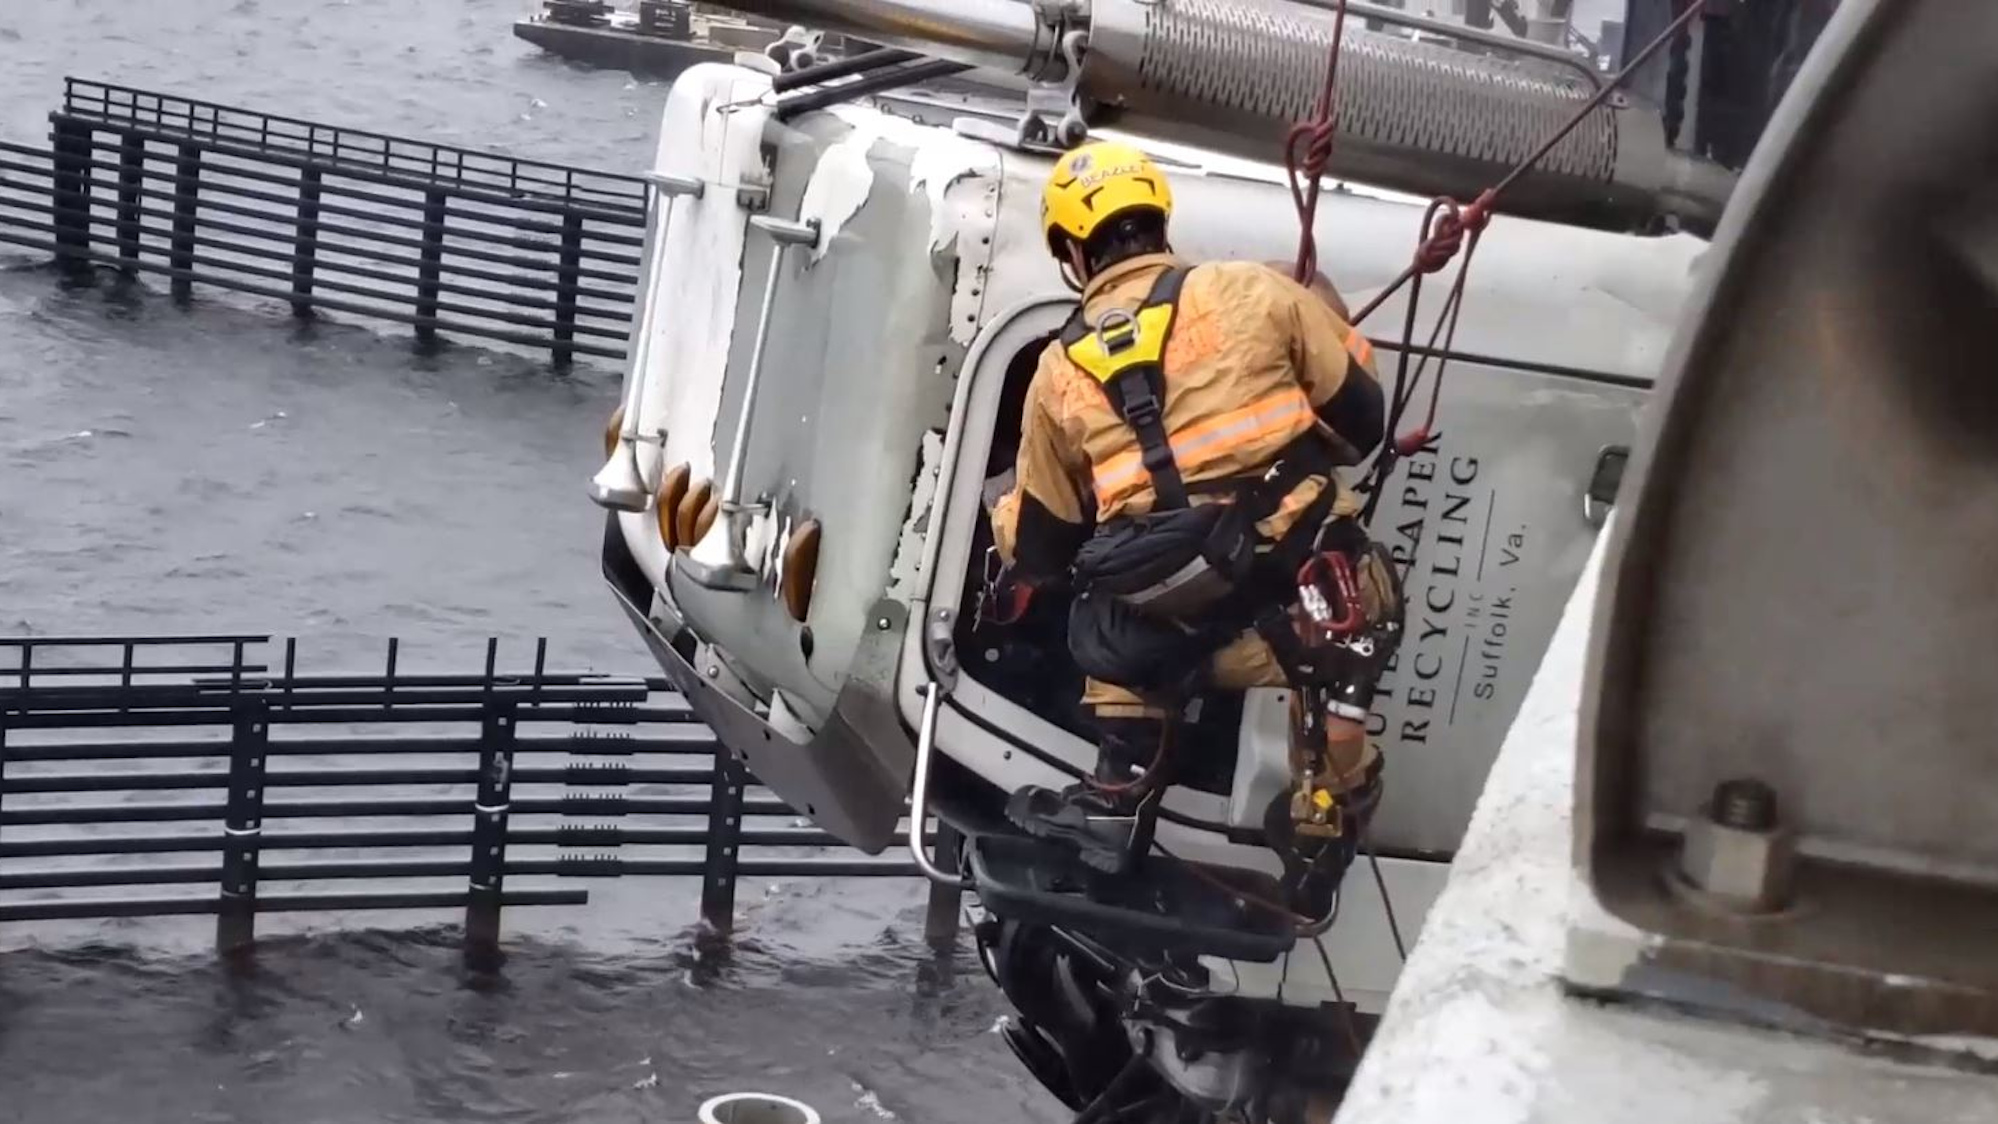 VA Firefighters Rescue Truck Driver Hanging from Bridge Firehouse